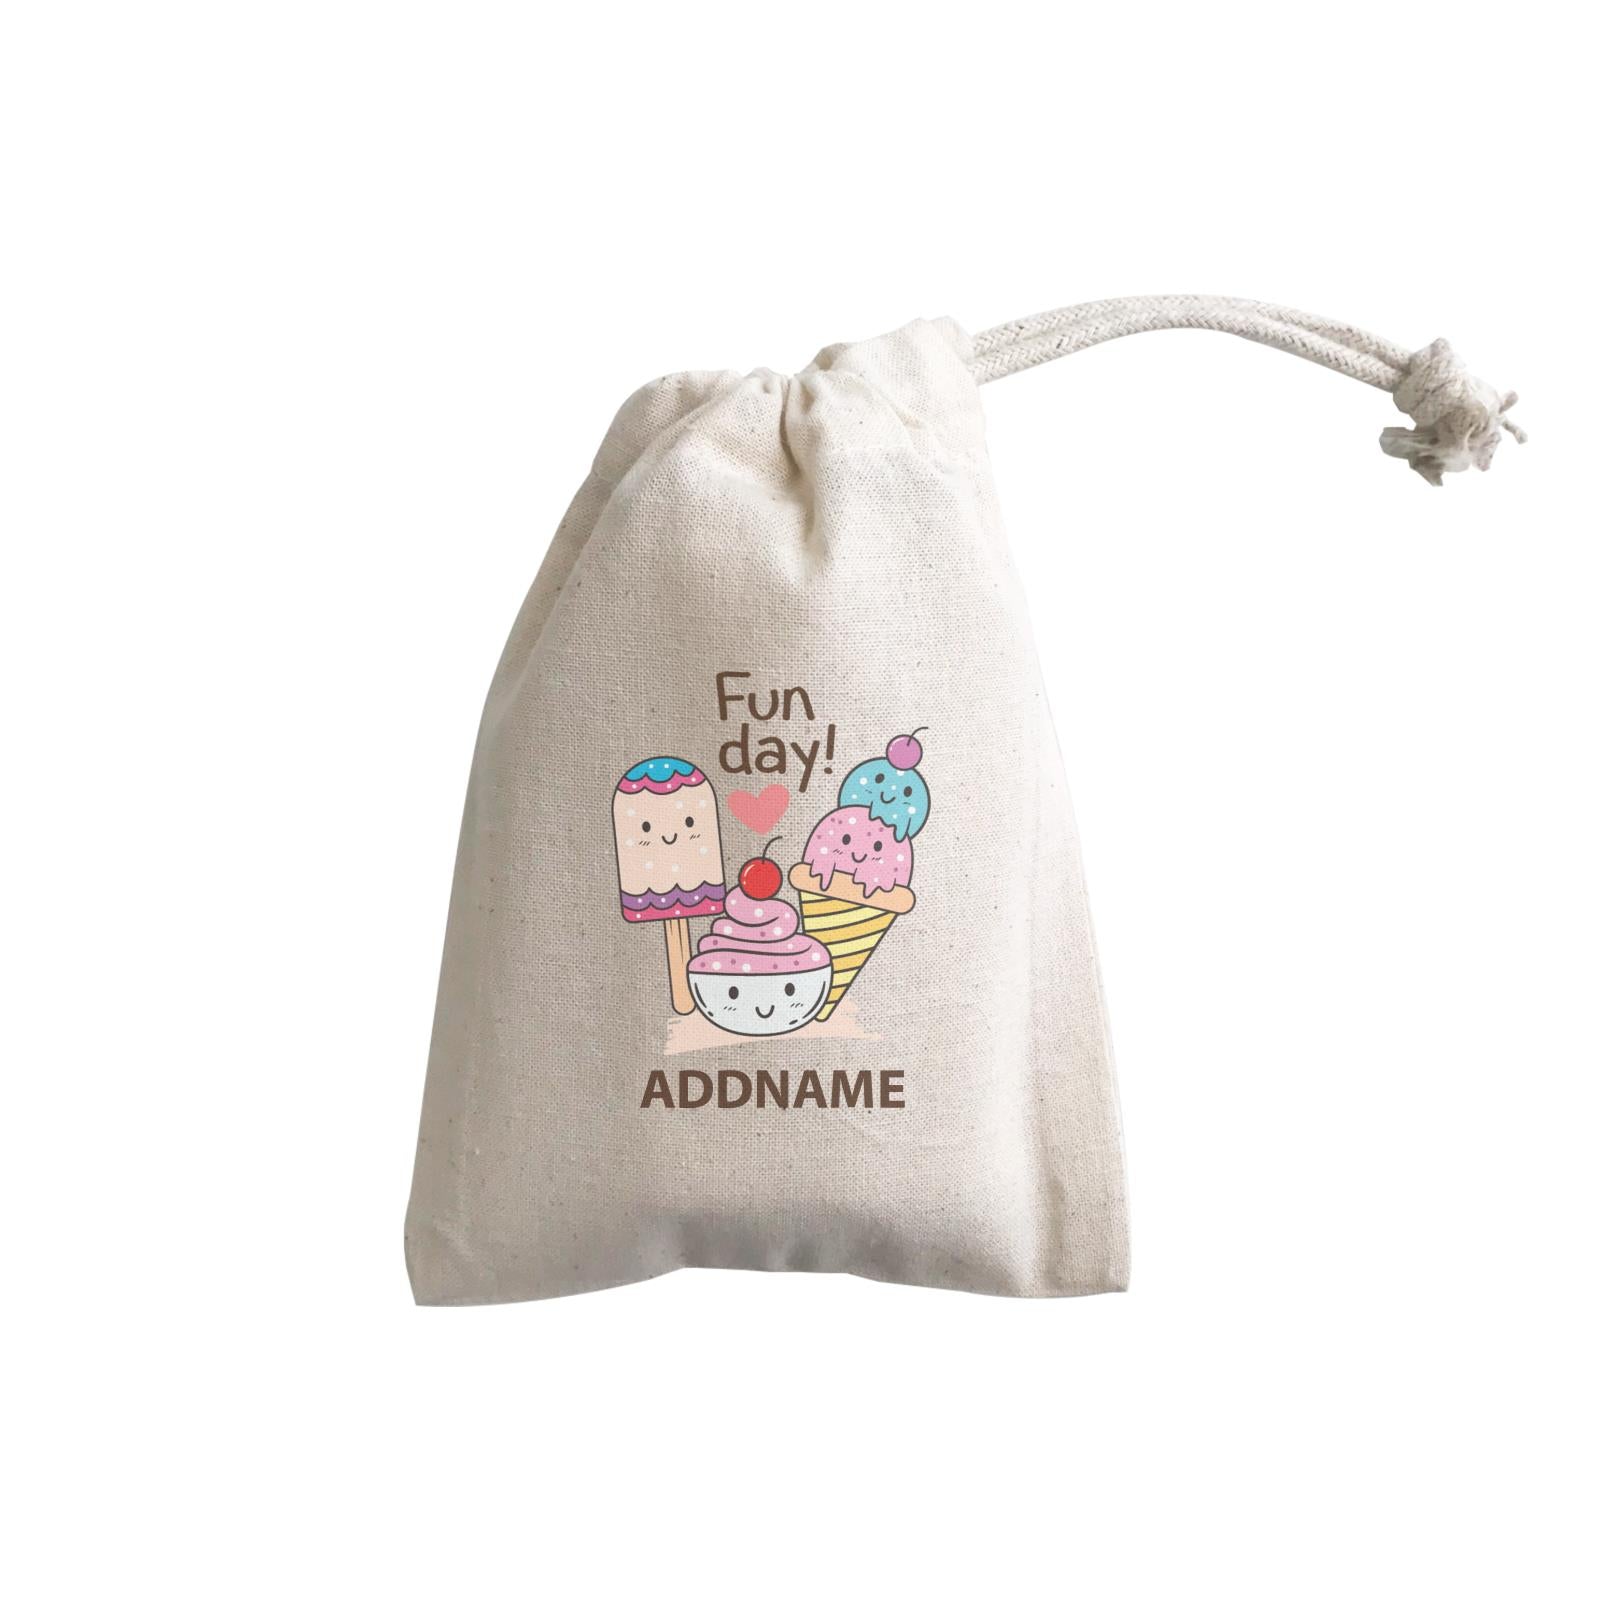 Cool Cute Foods Fun Day Ice Cream Addname GP Gift Pouch